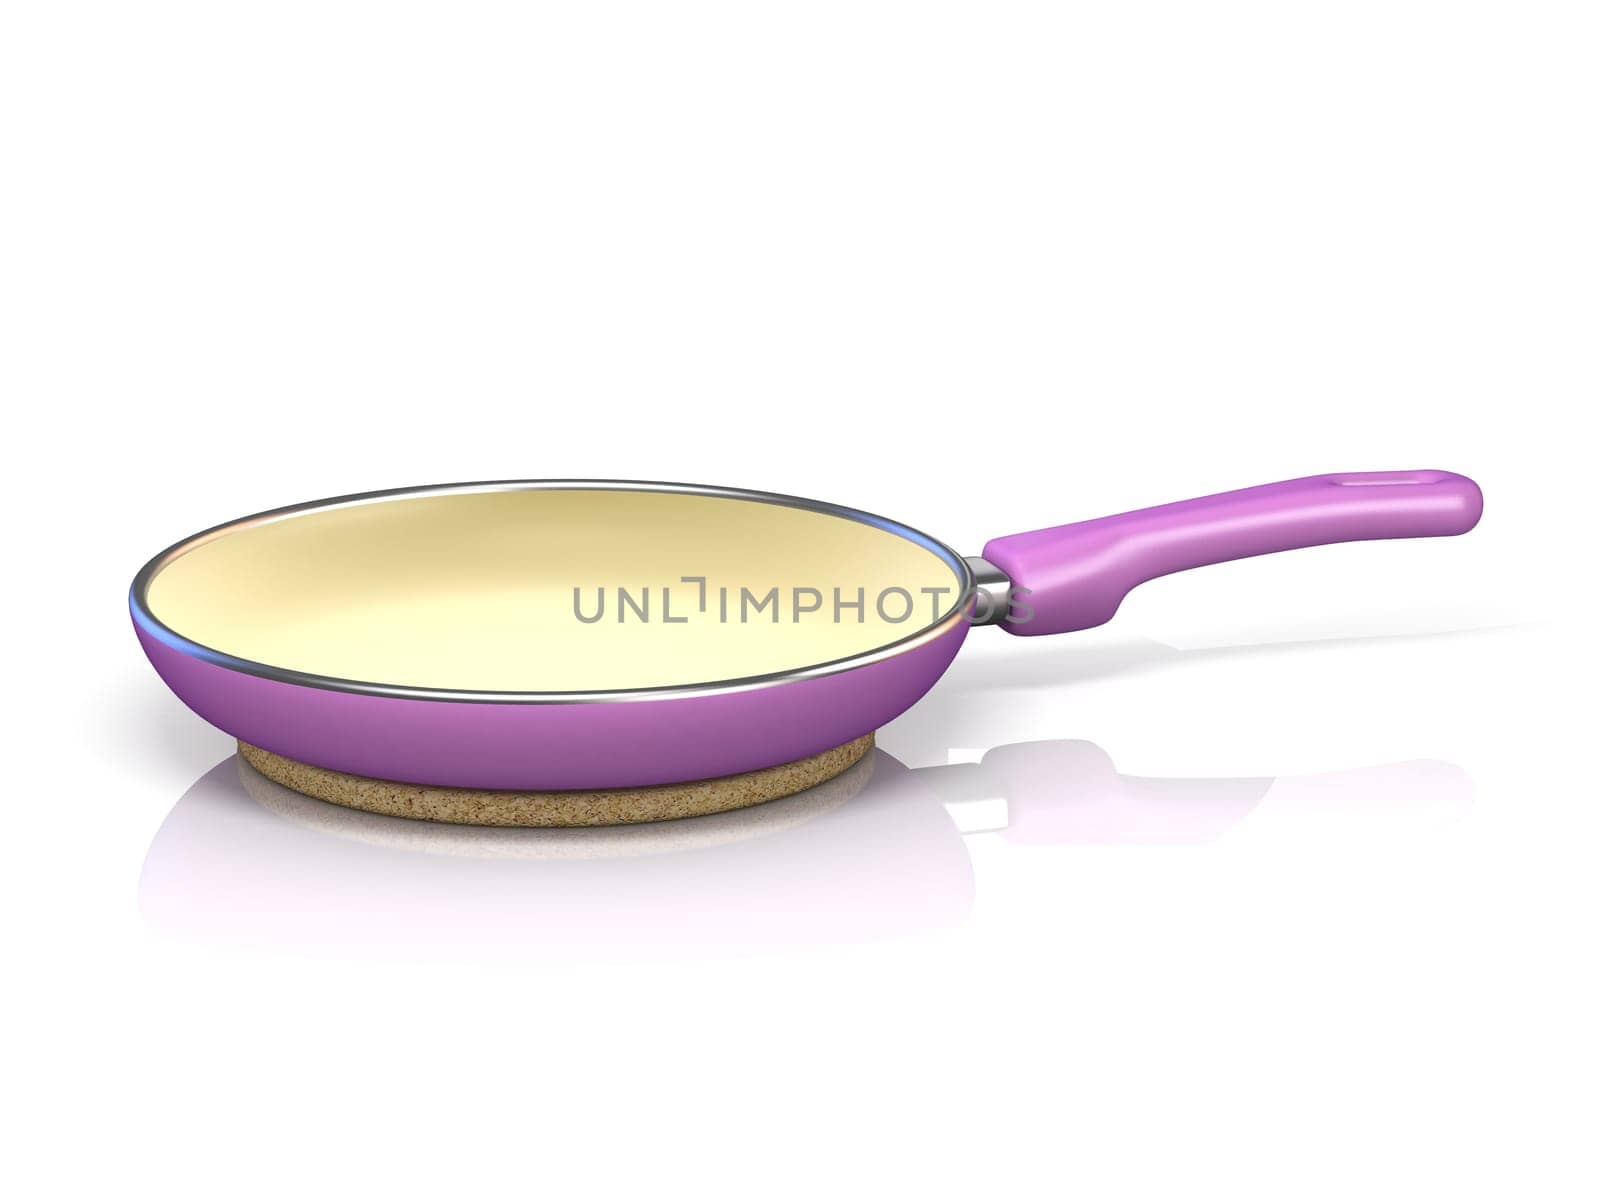 Purple cooking pan 3D rendering illustration isolated on white background